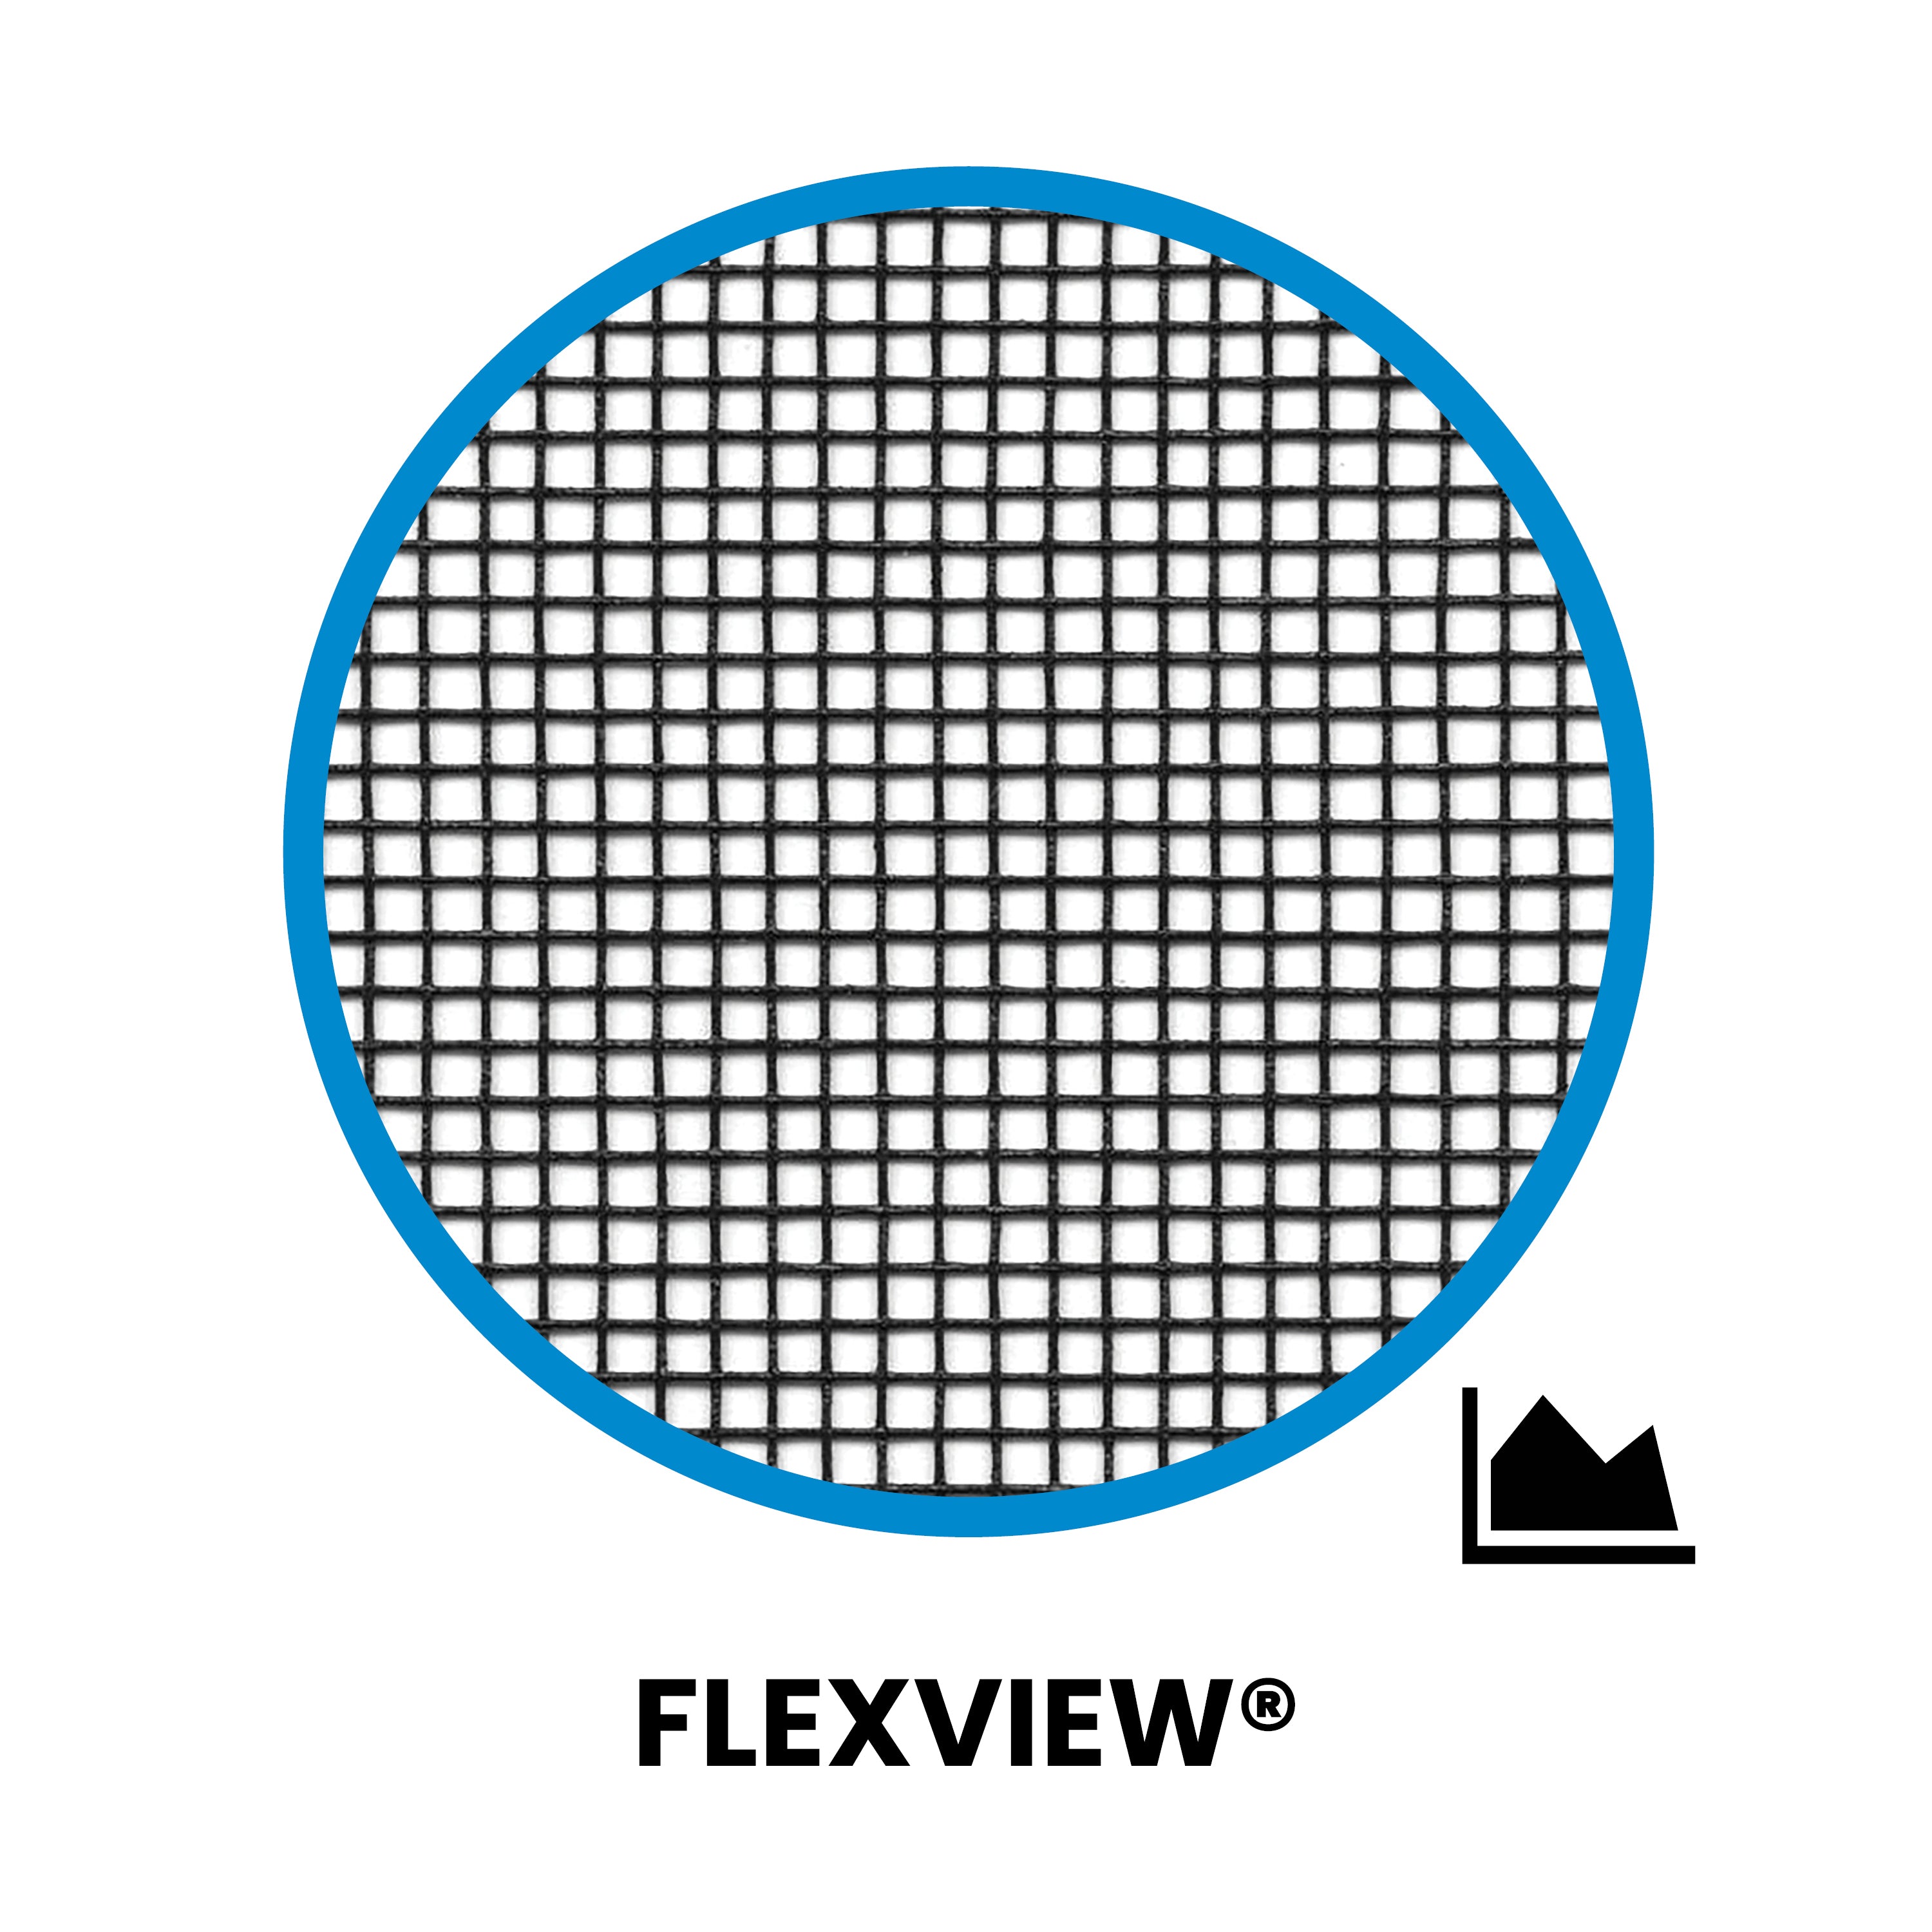 FS-Flexview_Swatch_with-Name-1.jpg__PID:274be7e4-4529-4c98-bbd6-d6ad3aaeadf2